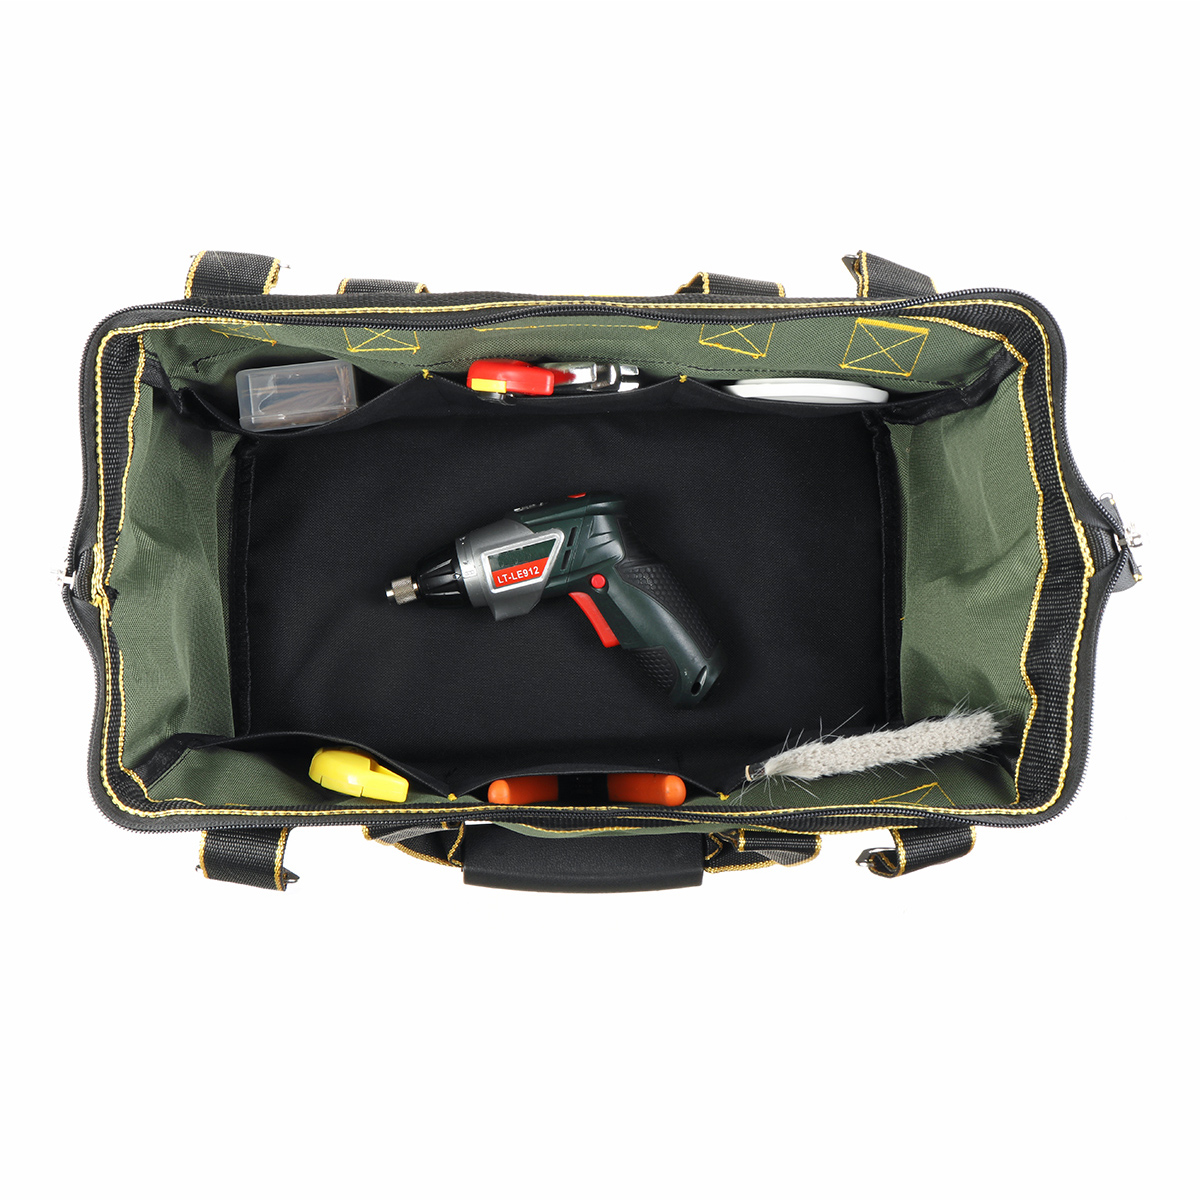 1680D-Multifunction-Oxford-Cloth-Tool-Bag-Storage-Pocket-Tools-Pouch-Holder-Bag-1668294-9